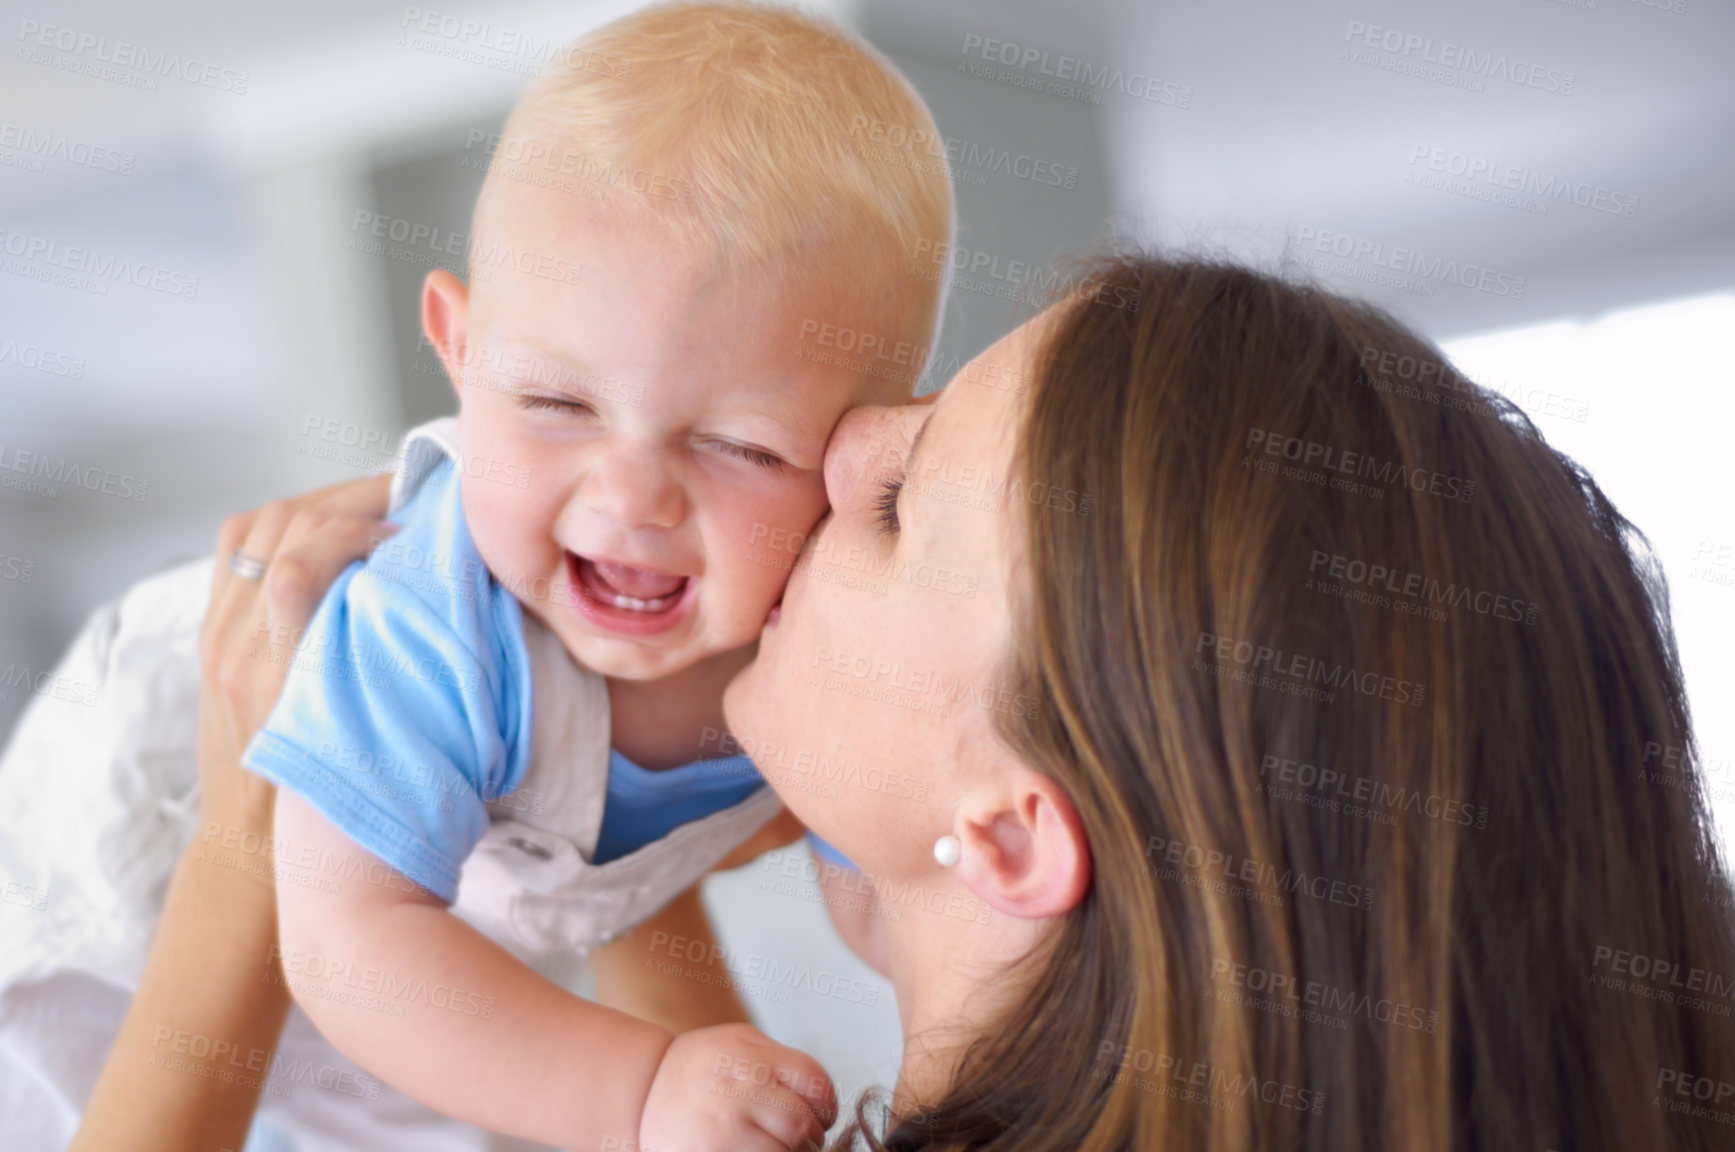 Buy stock photo Young beautiful mother holding her cute baby